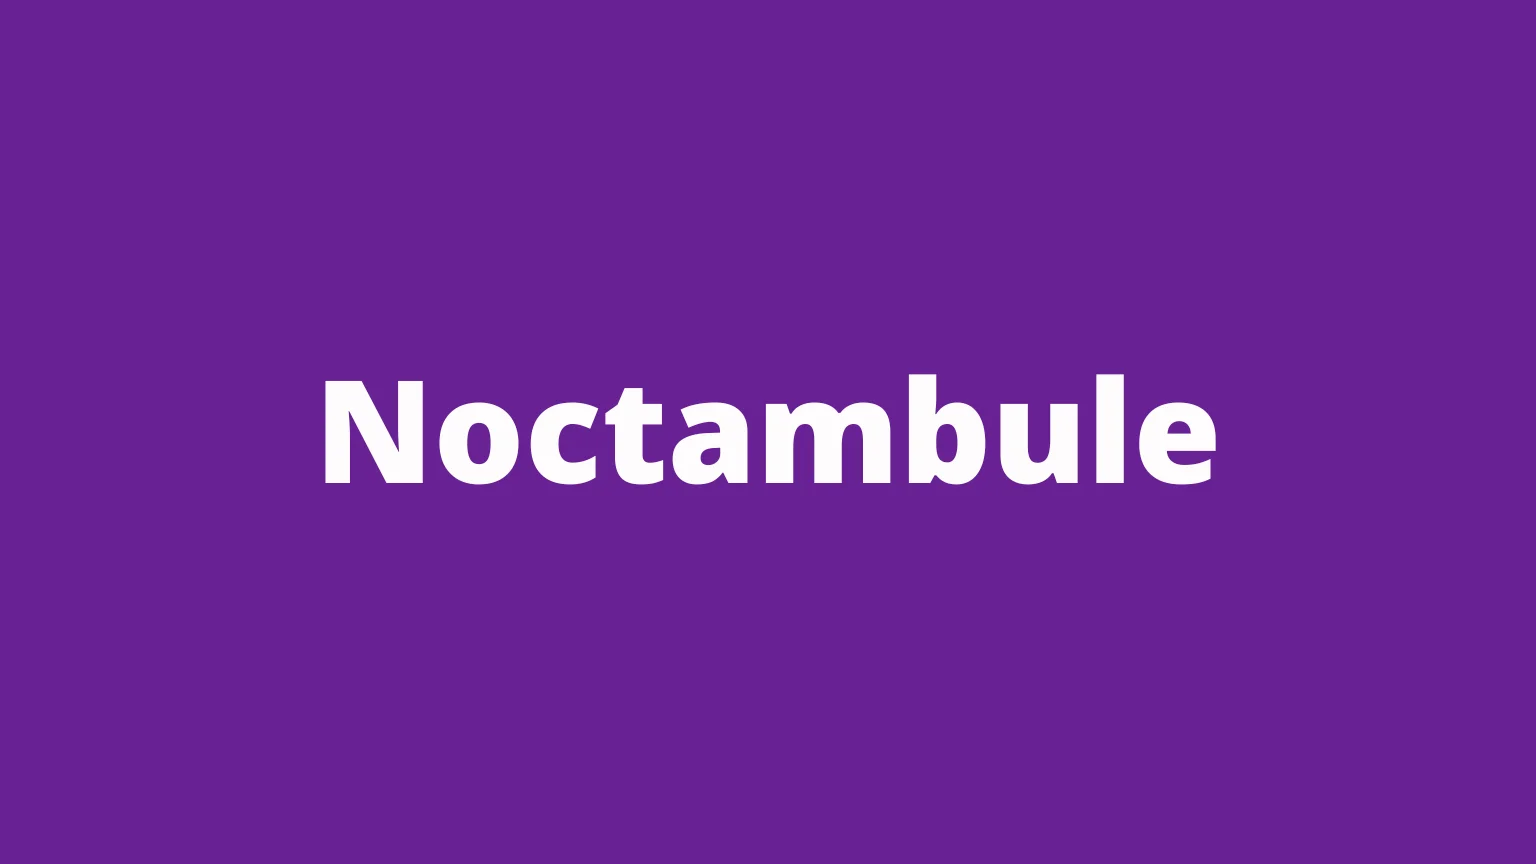 The word noctambule and its meaning